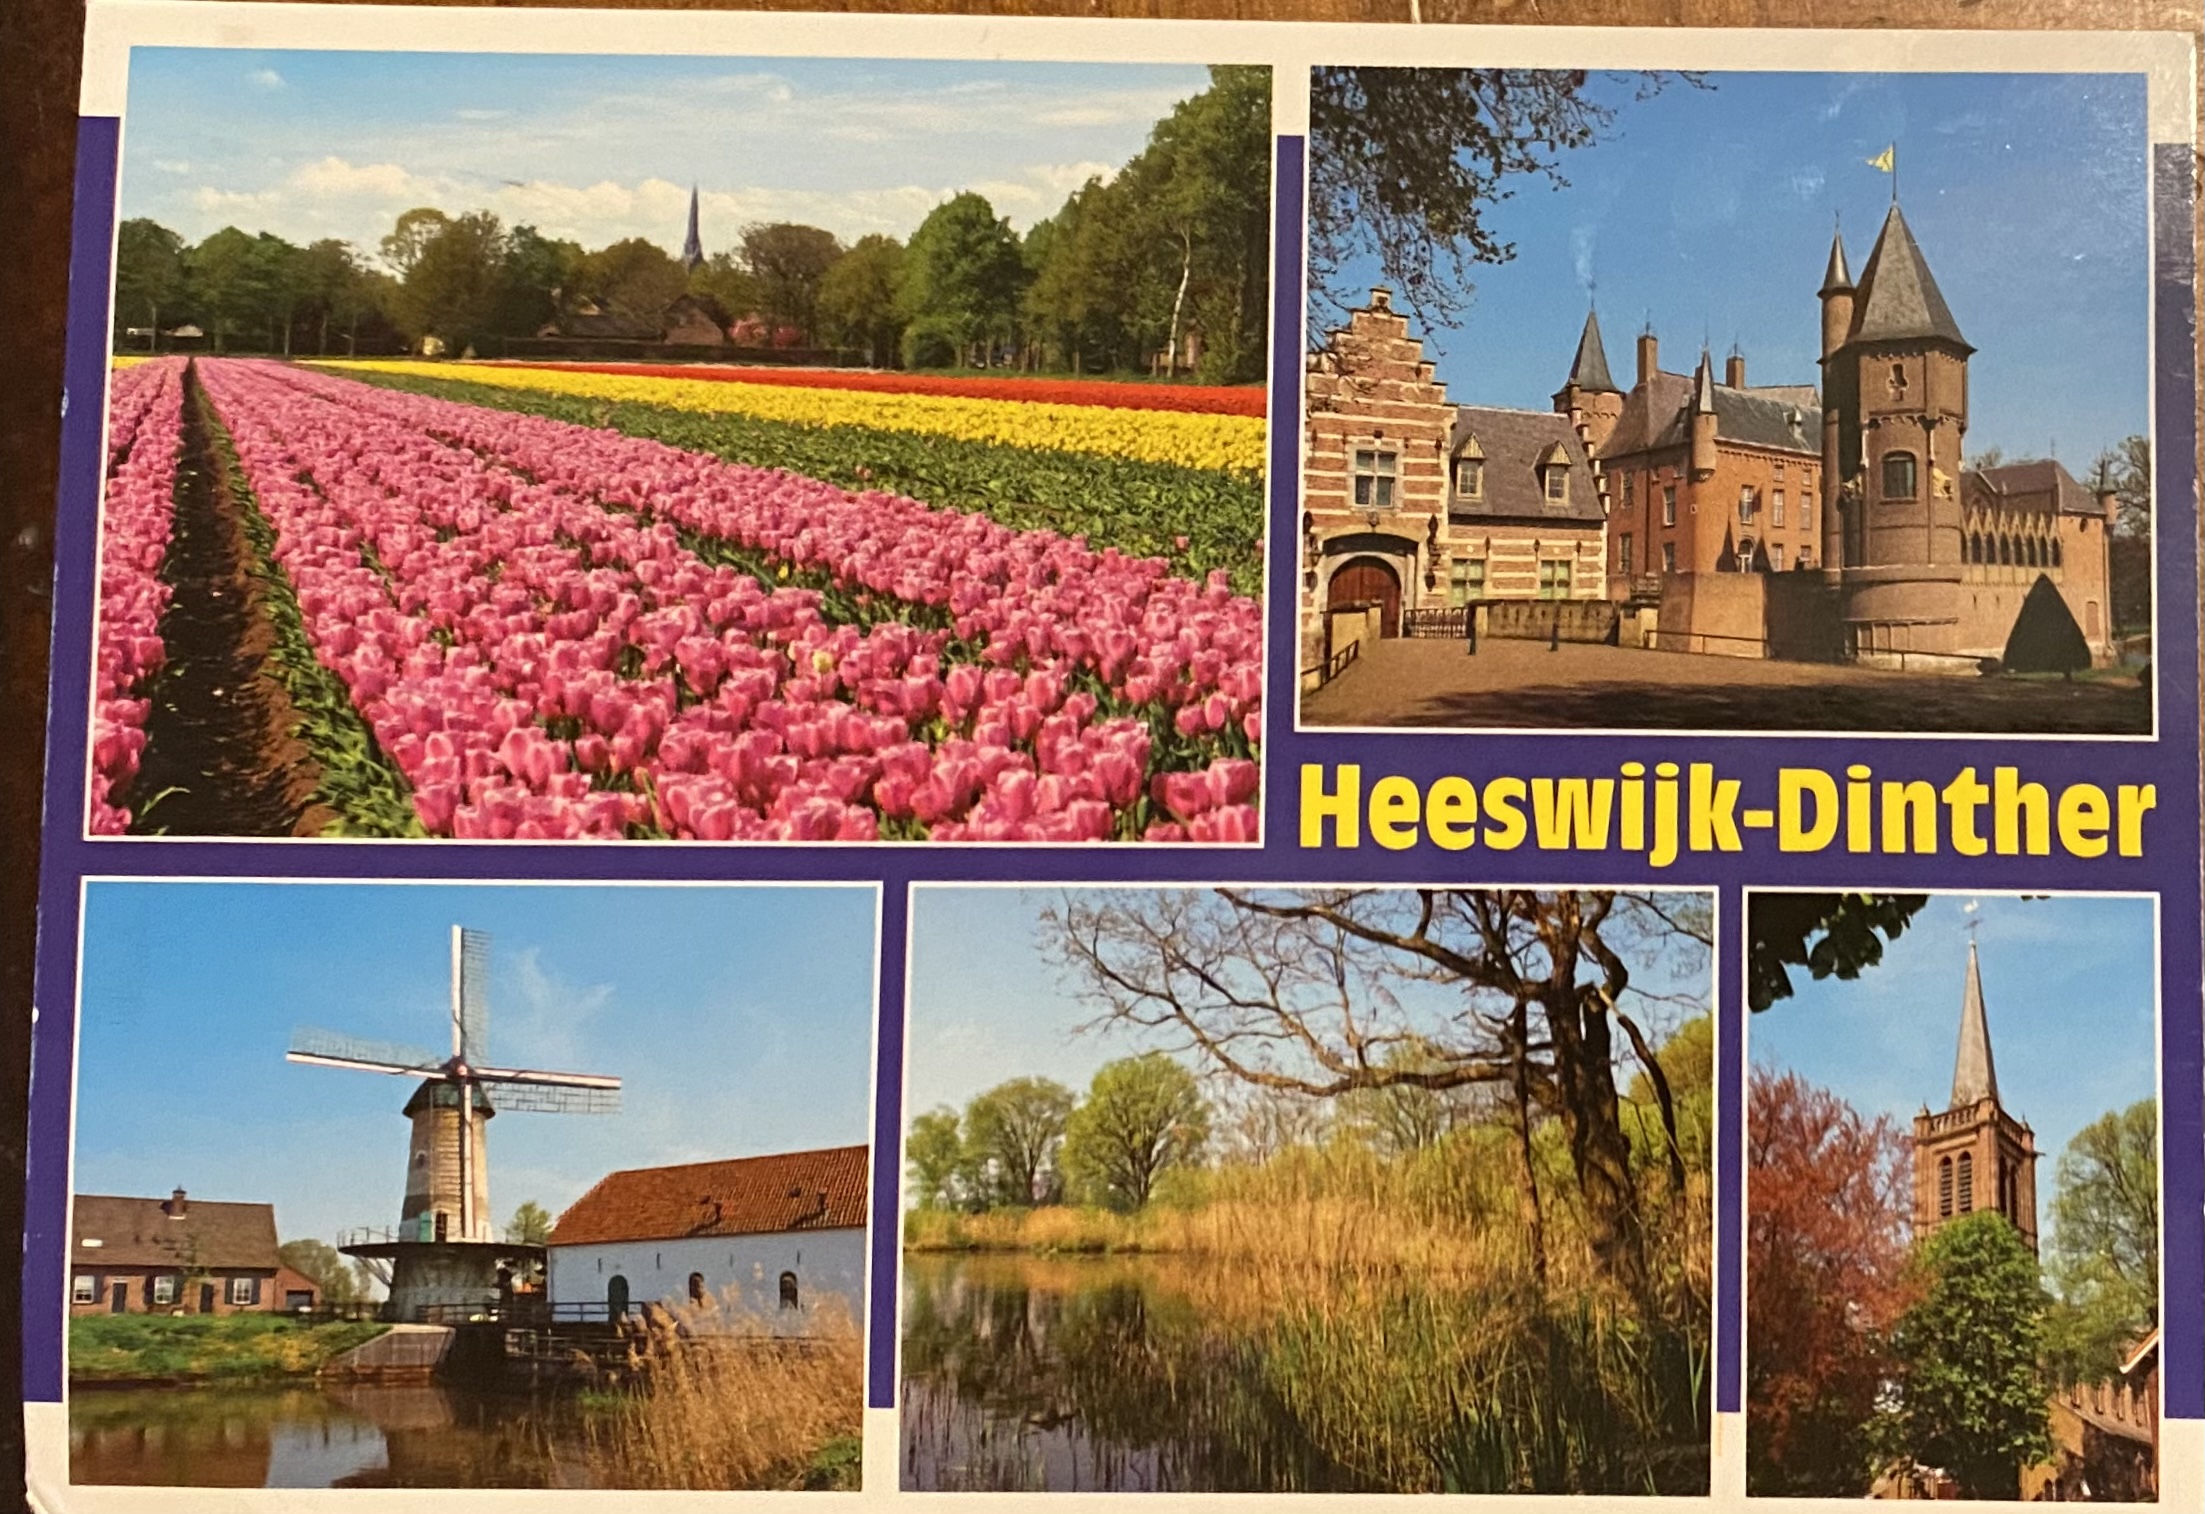 Postcard from the Netherlands, received Jan 26 2022